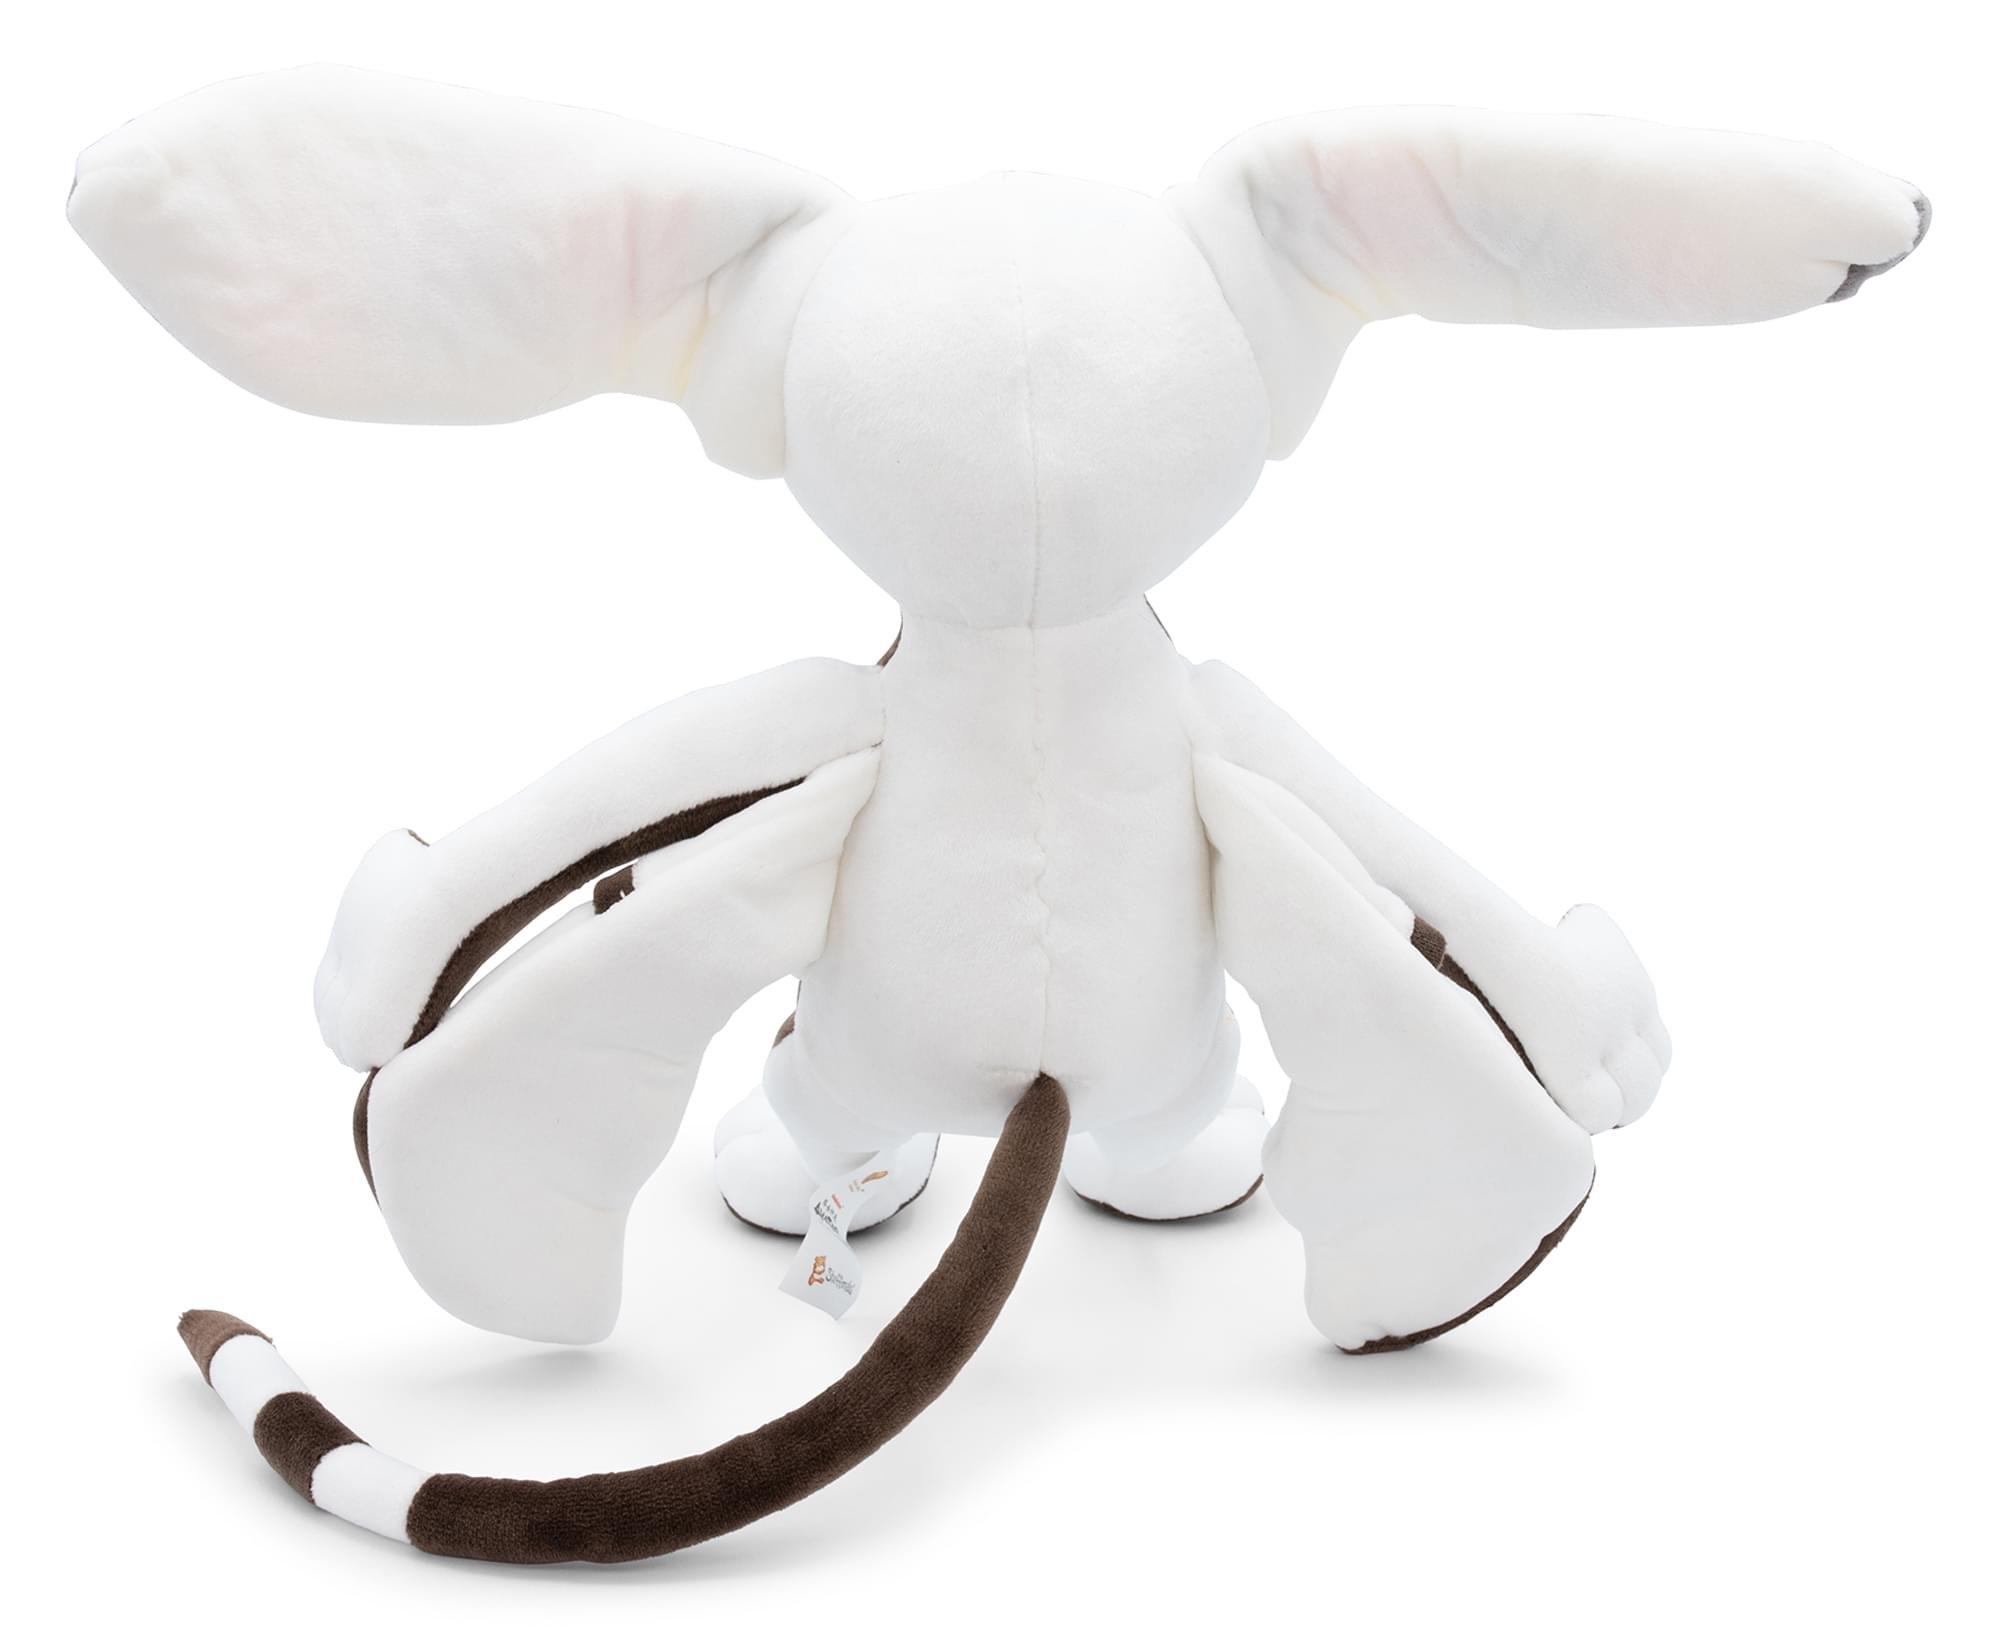 Avatar: The Last Airbender 13-in Momo Plush Toy